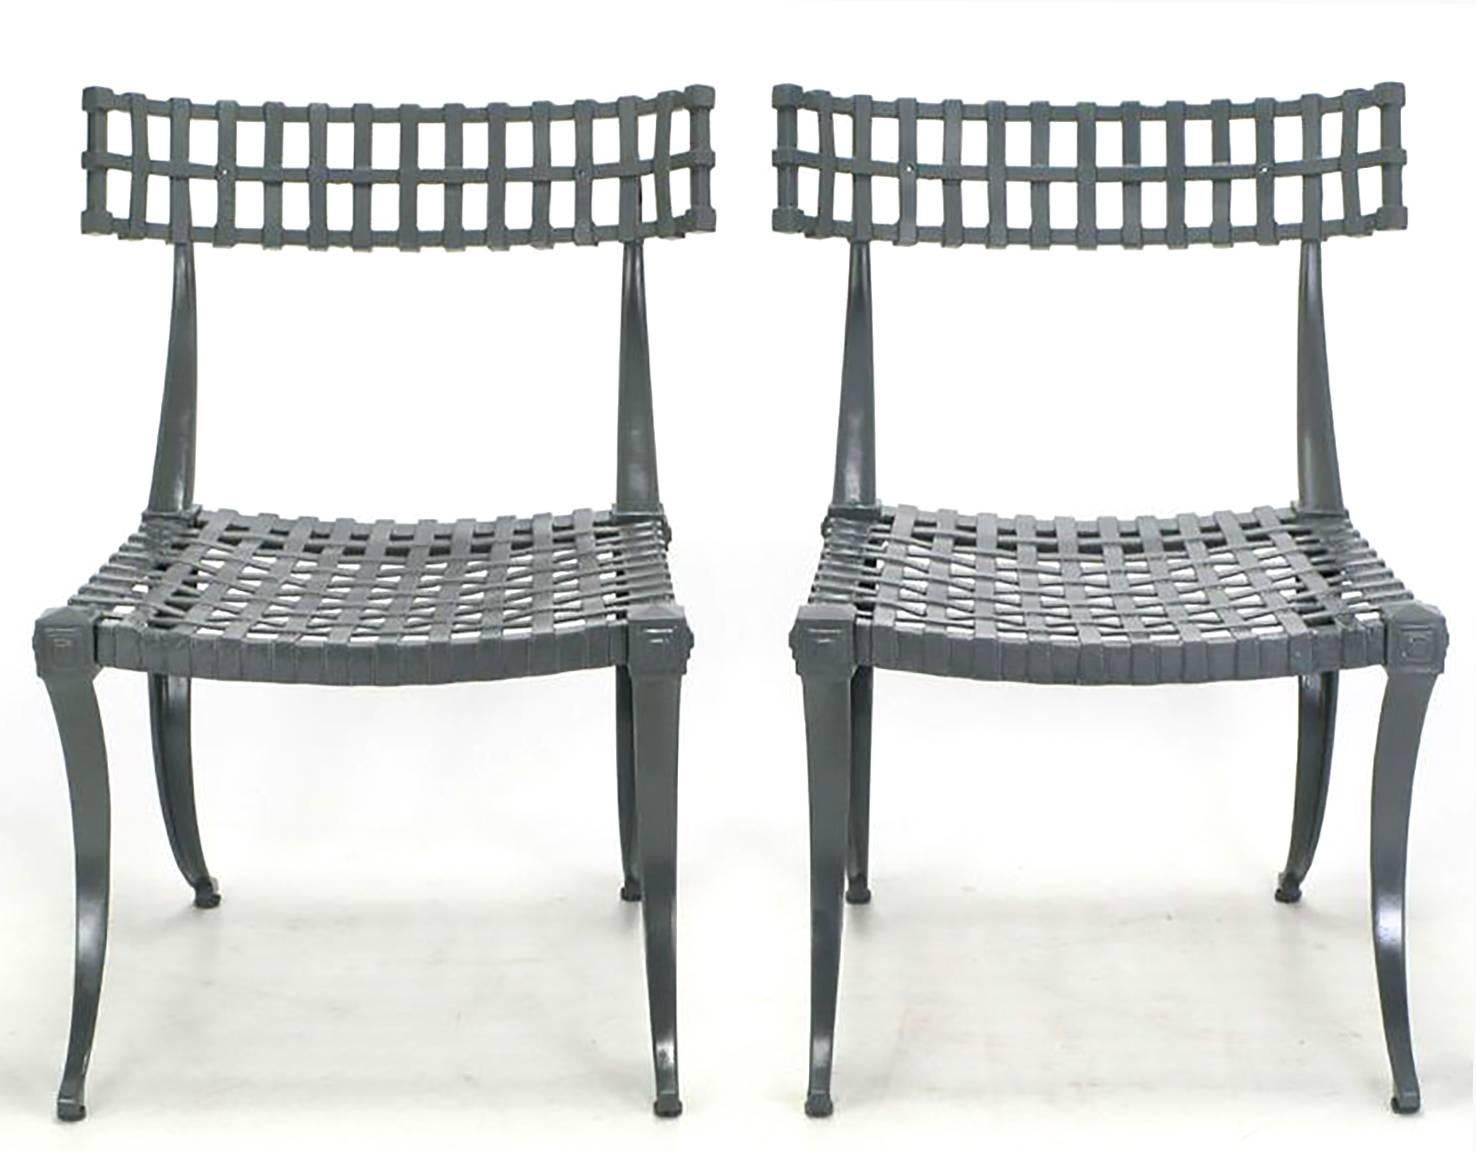 Set of six iconic klismos dining chairs by Thinline, in high quality cast aluminum, finished in new slate gray enamel. Can be used indoors or out. See our listings for the matching dining table.